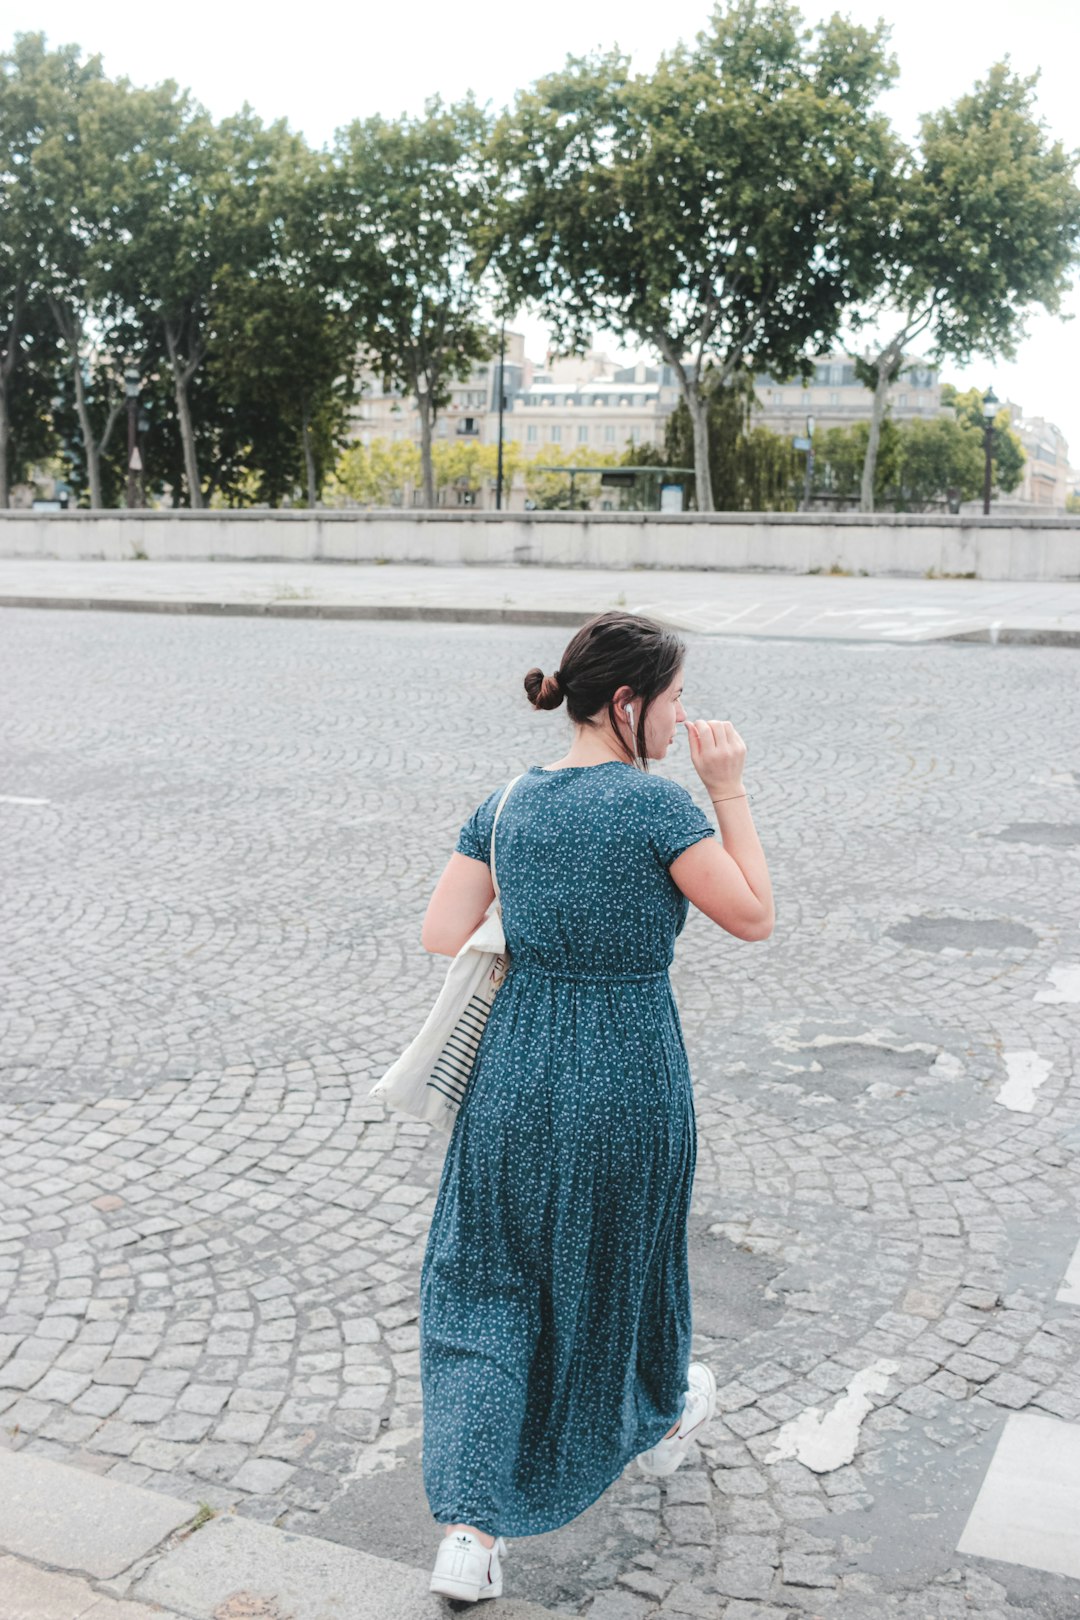 woman in blue dress standing on gray concrete pavement during daytime